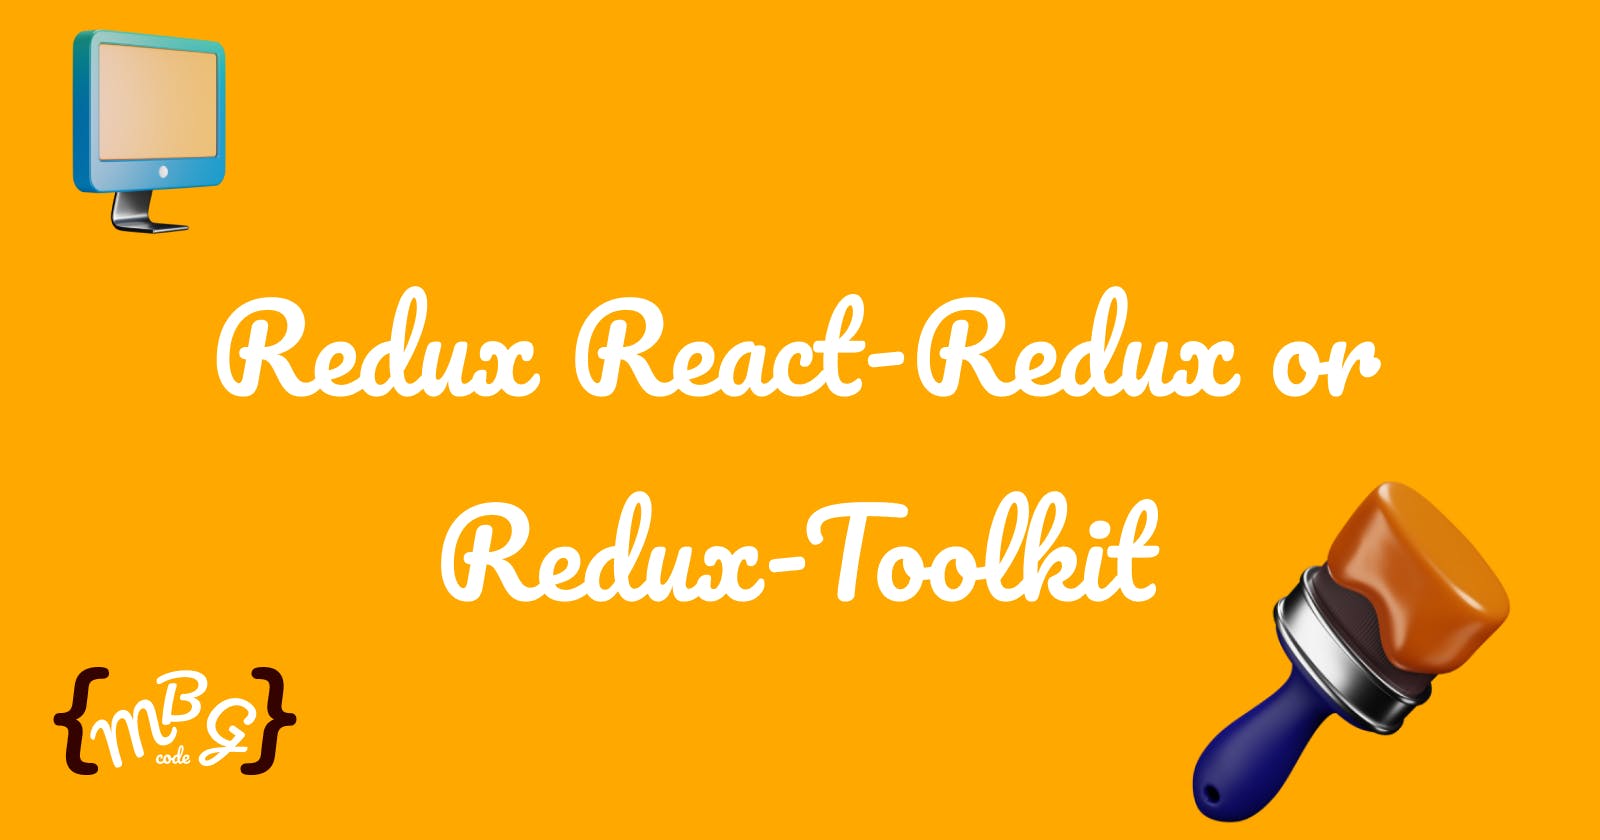 Redux, Redux Toolkit, or React-redux? which should I learn?